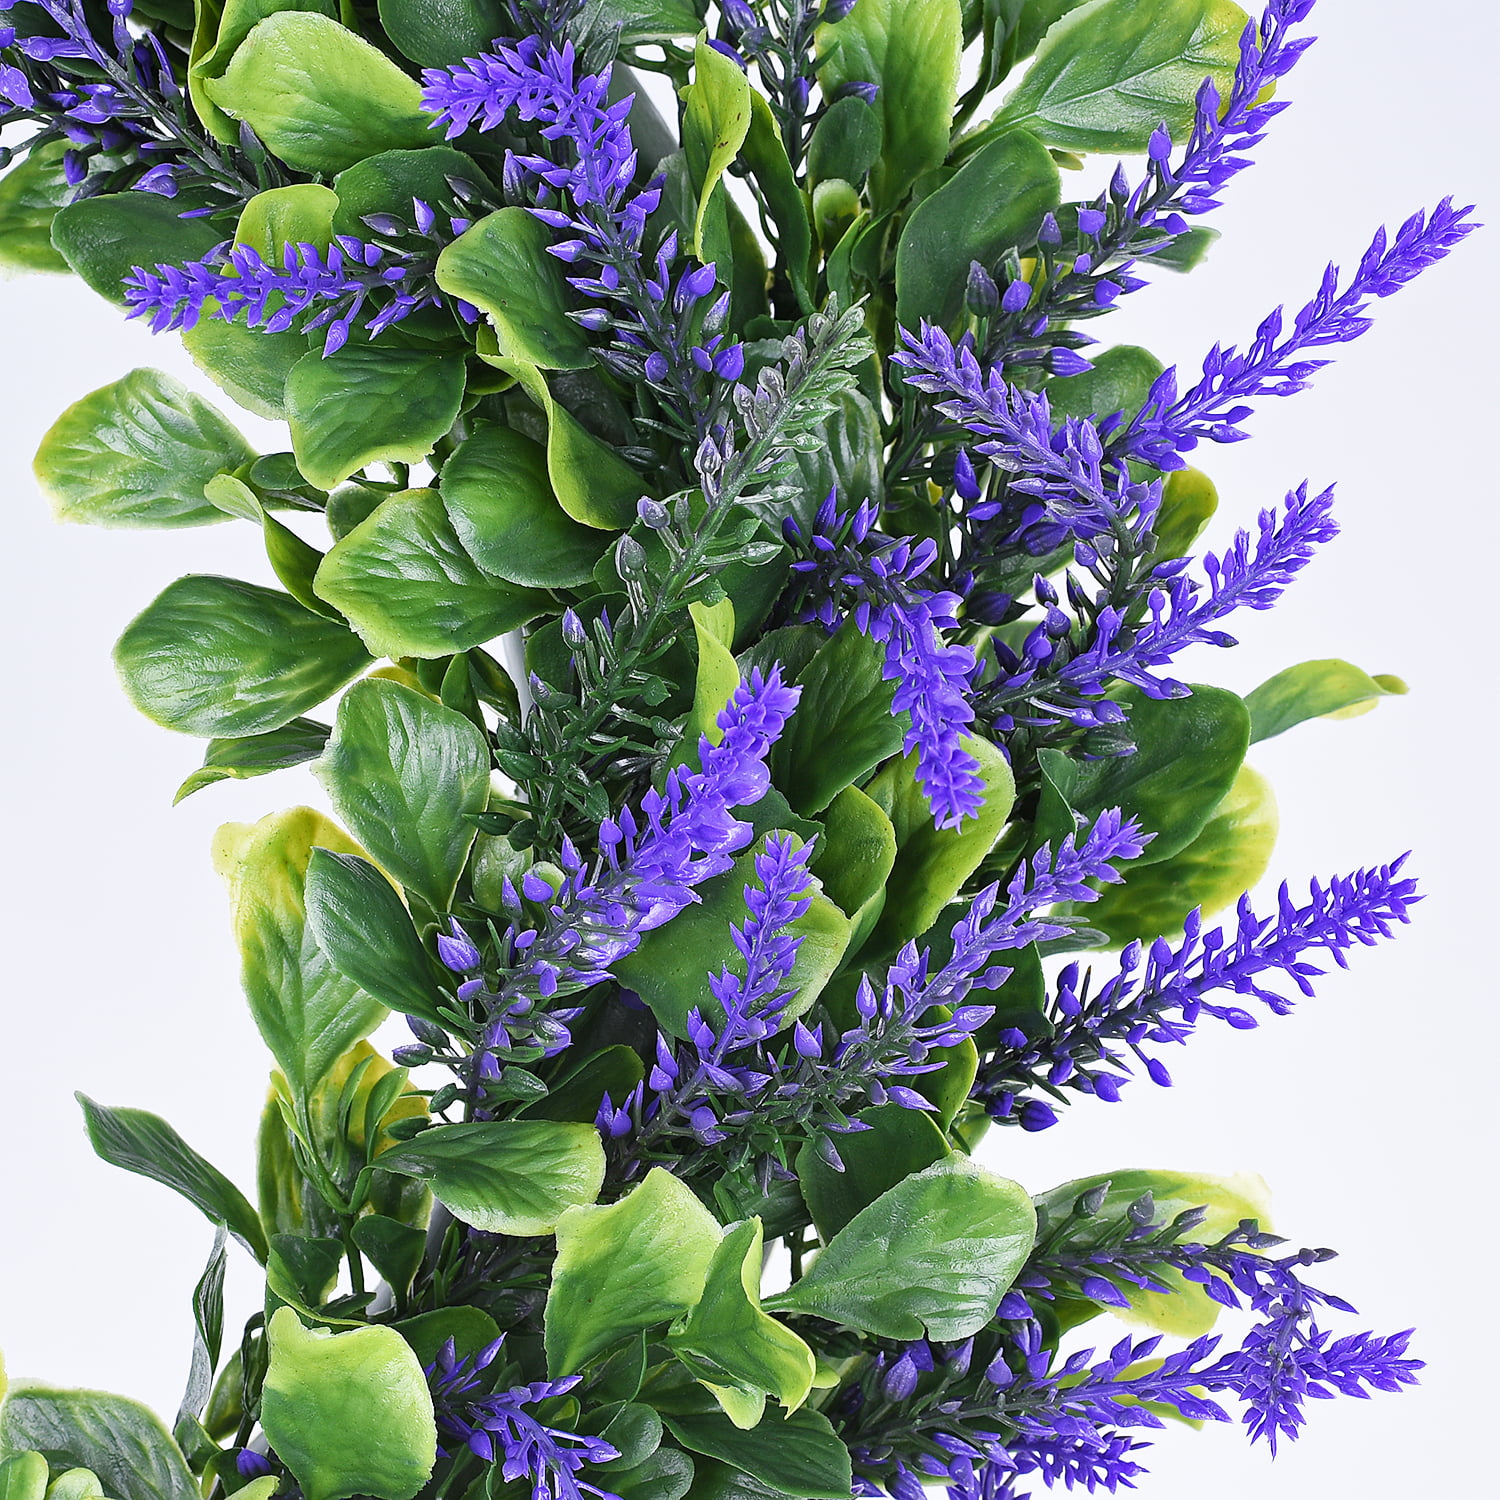 Handcrafted Spring Wreath with Green Leaves for Front Door Decorations Wall Decor BEJOY Artificial Flower Wreath 56cm Artificial Lavender Greenery Wreath